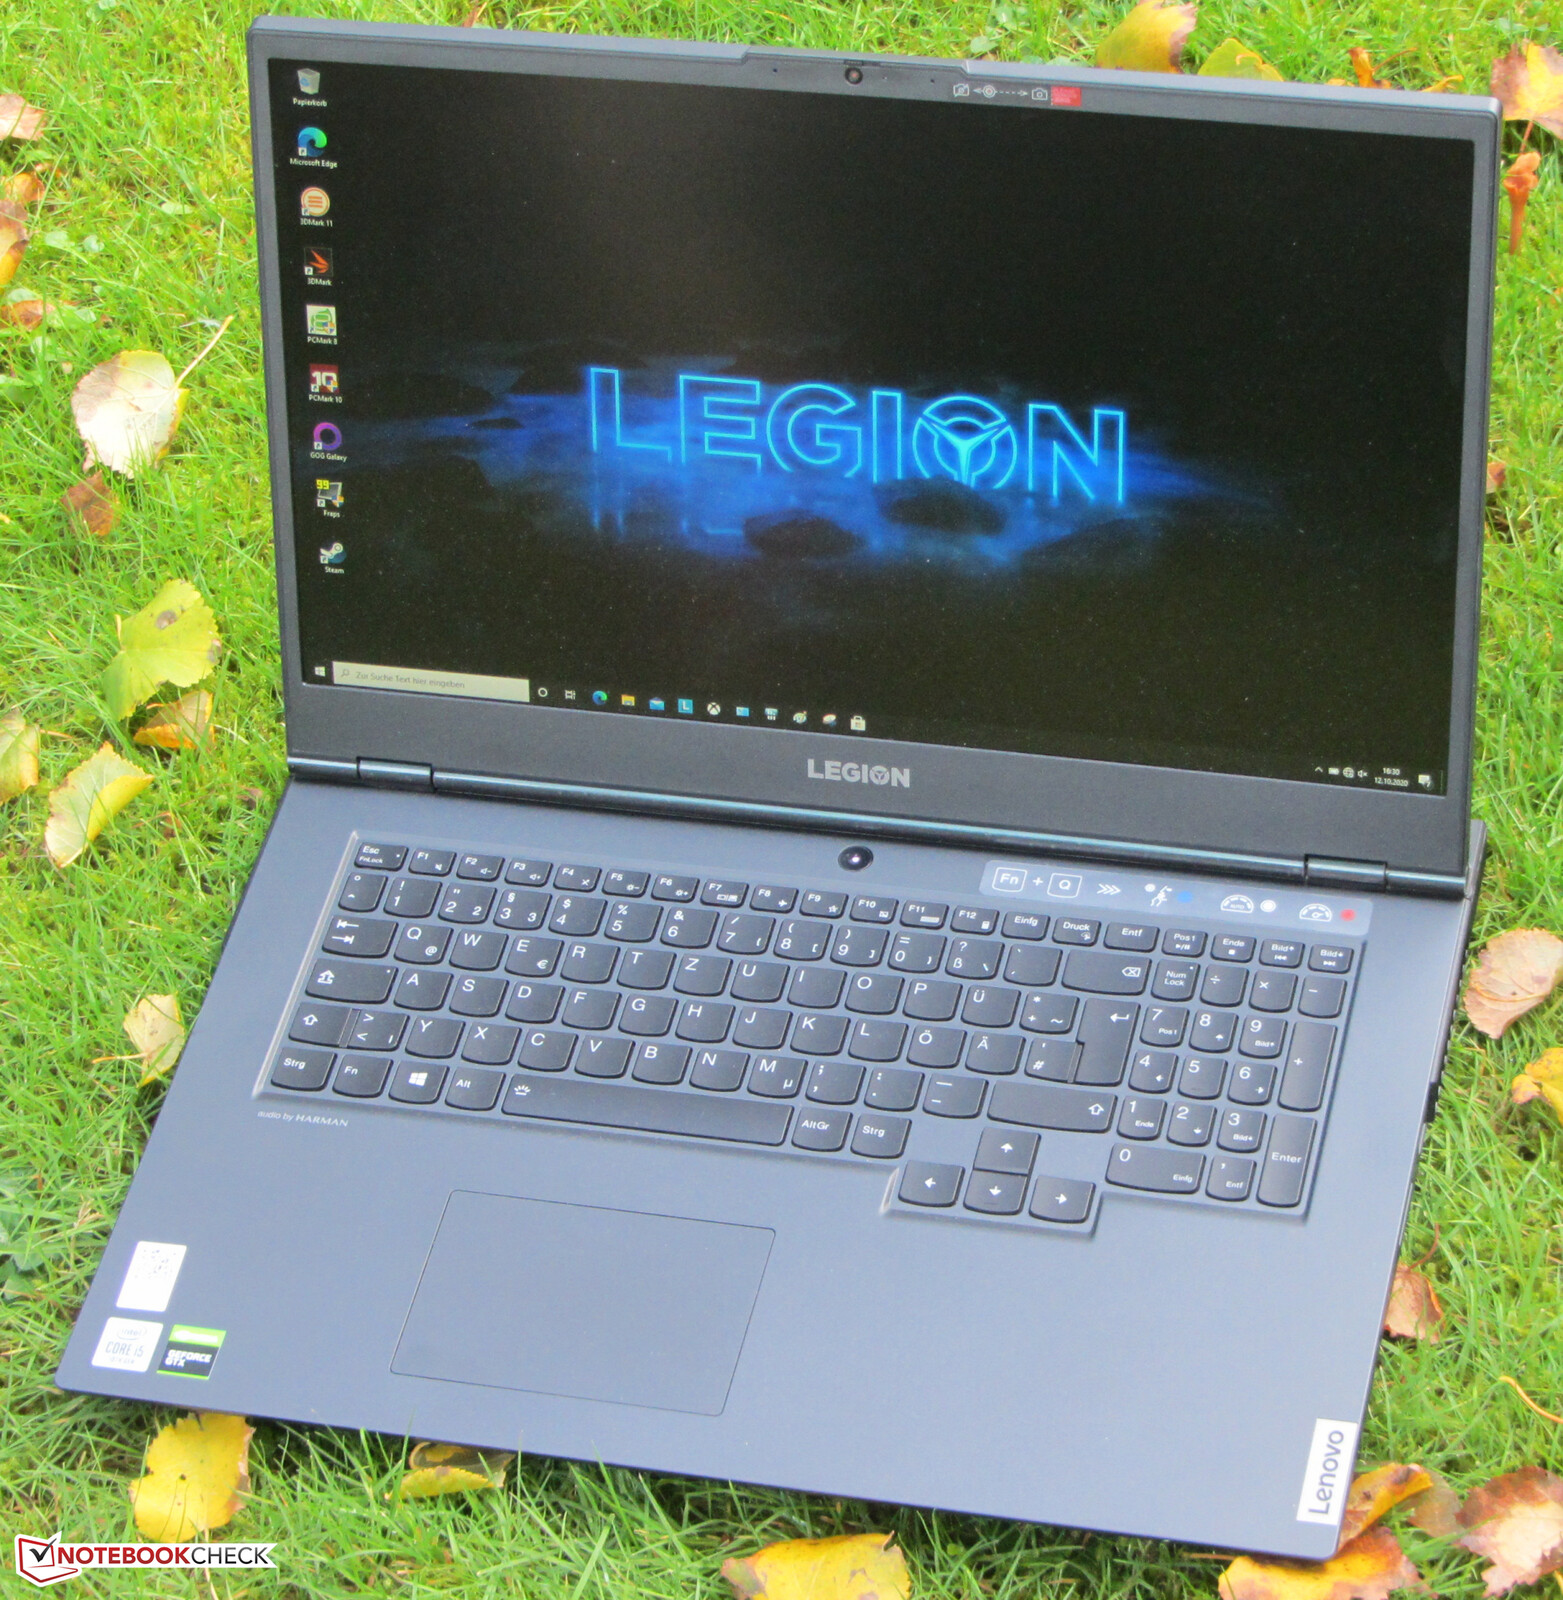 Popular Lenovo Legion 5 17 laptop on sale for $649 USD with AMD Ryzen 5 5600H, GeForce GTX graphics, and 256 GB NVMe SSD - NotebookCheck.net News